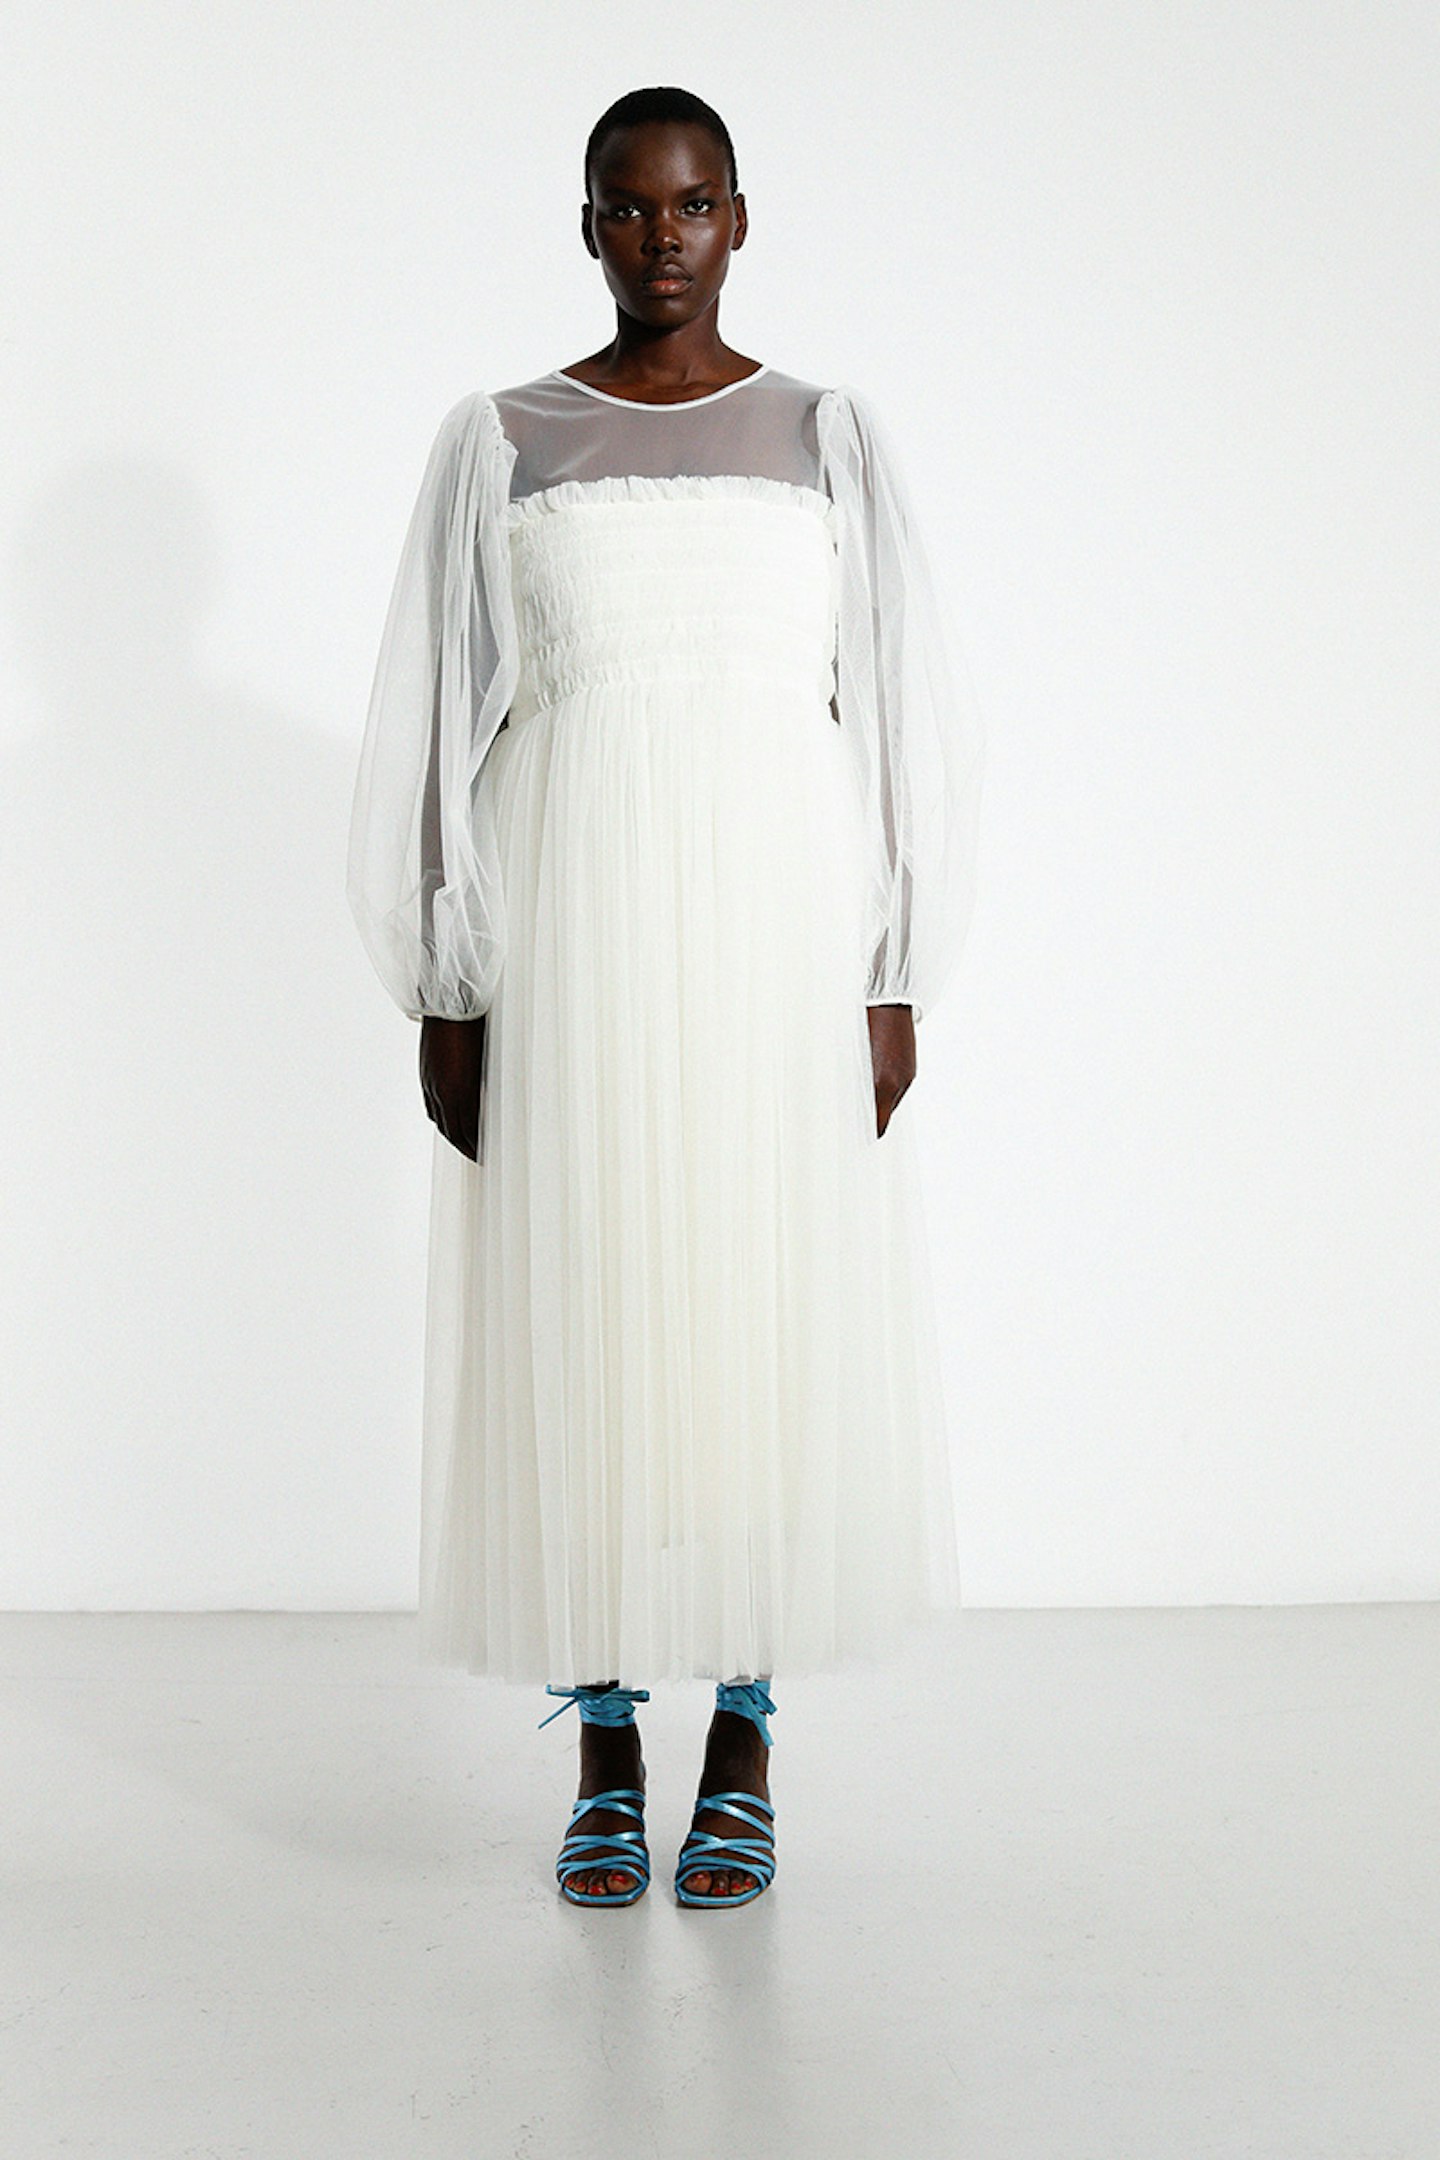 Molly Goddard, Quinn Hand-Smocked Tulle Dress With Gathered Long Sleeves